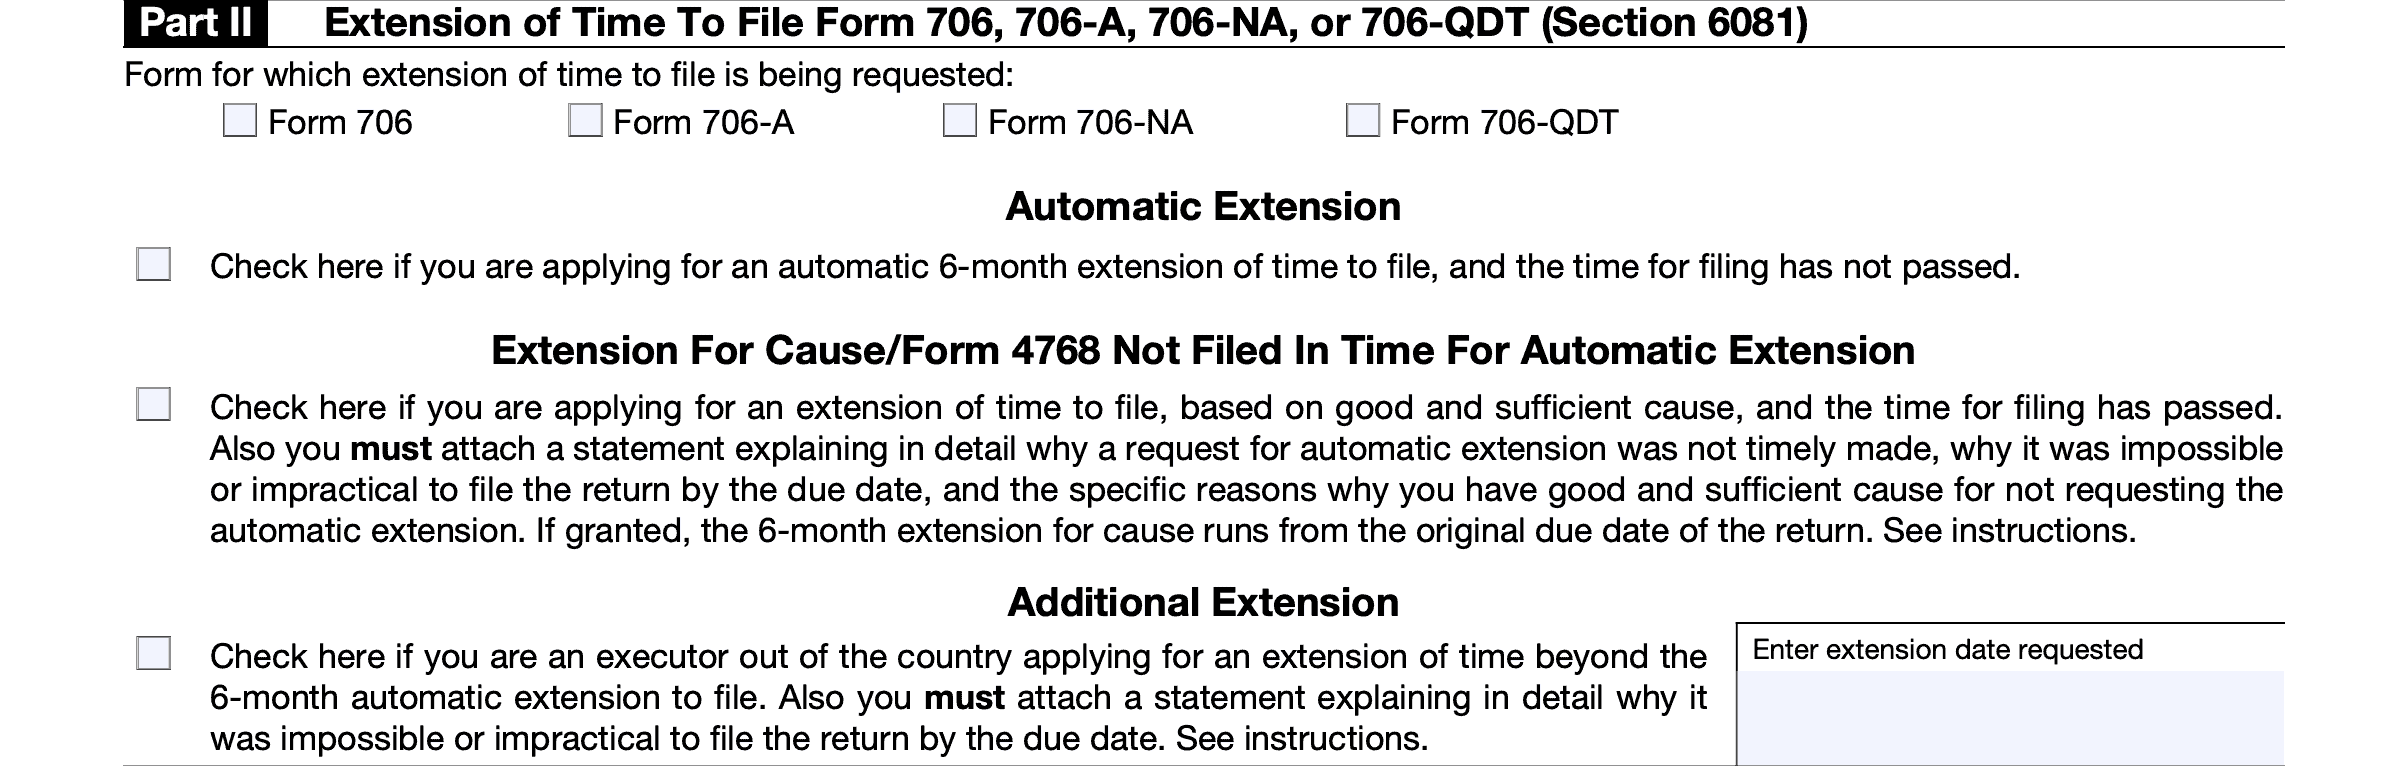 part II, extension of time to file